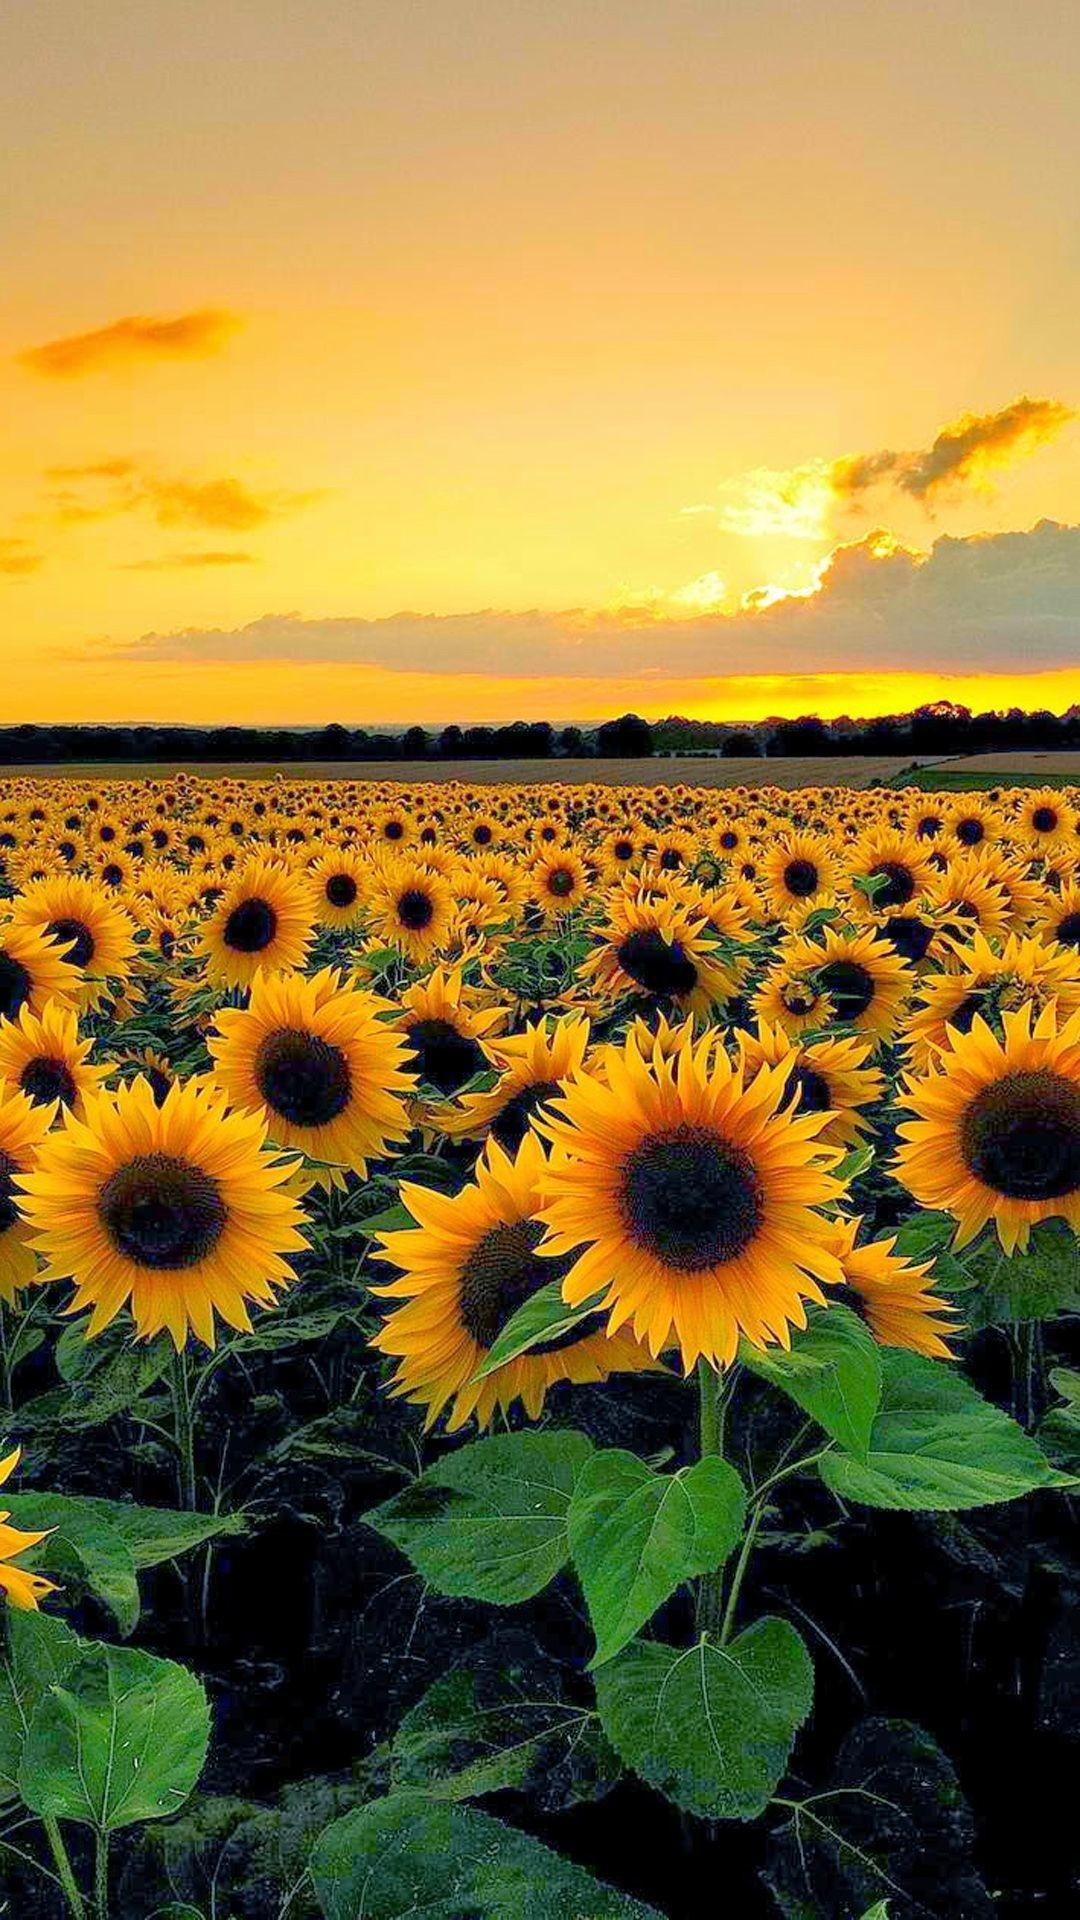 15 Excellent sunflower aesthetic wallpaper desktop You Can Use It At No ...